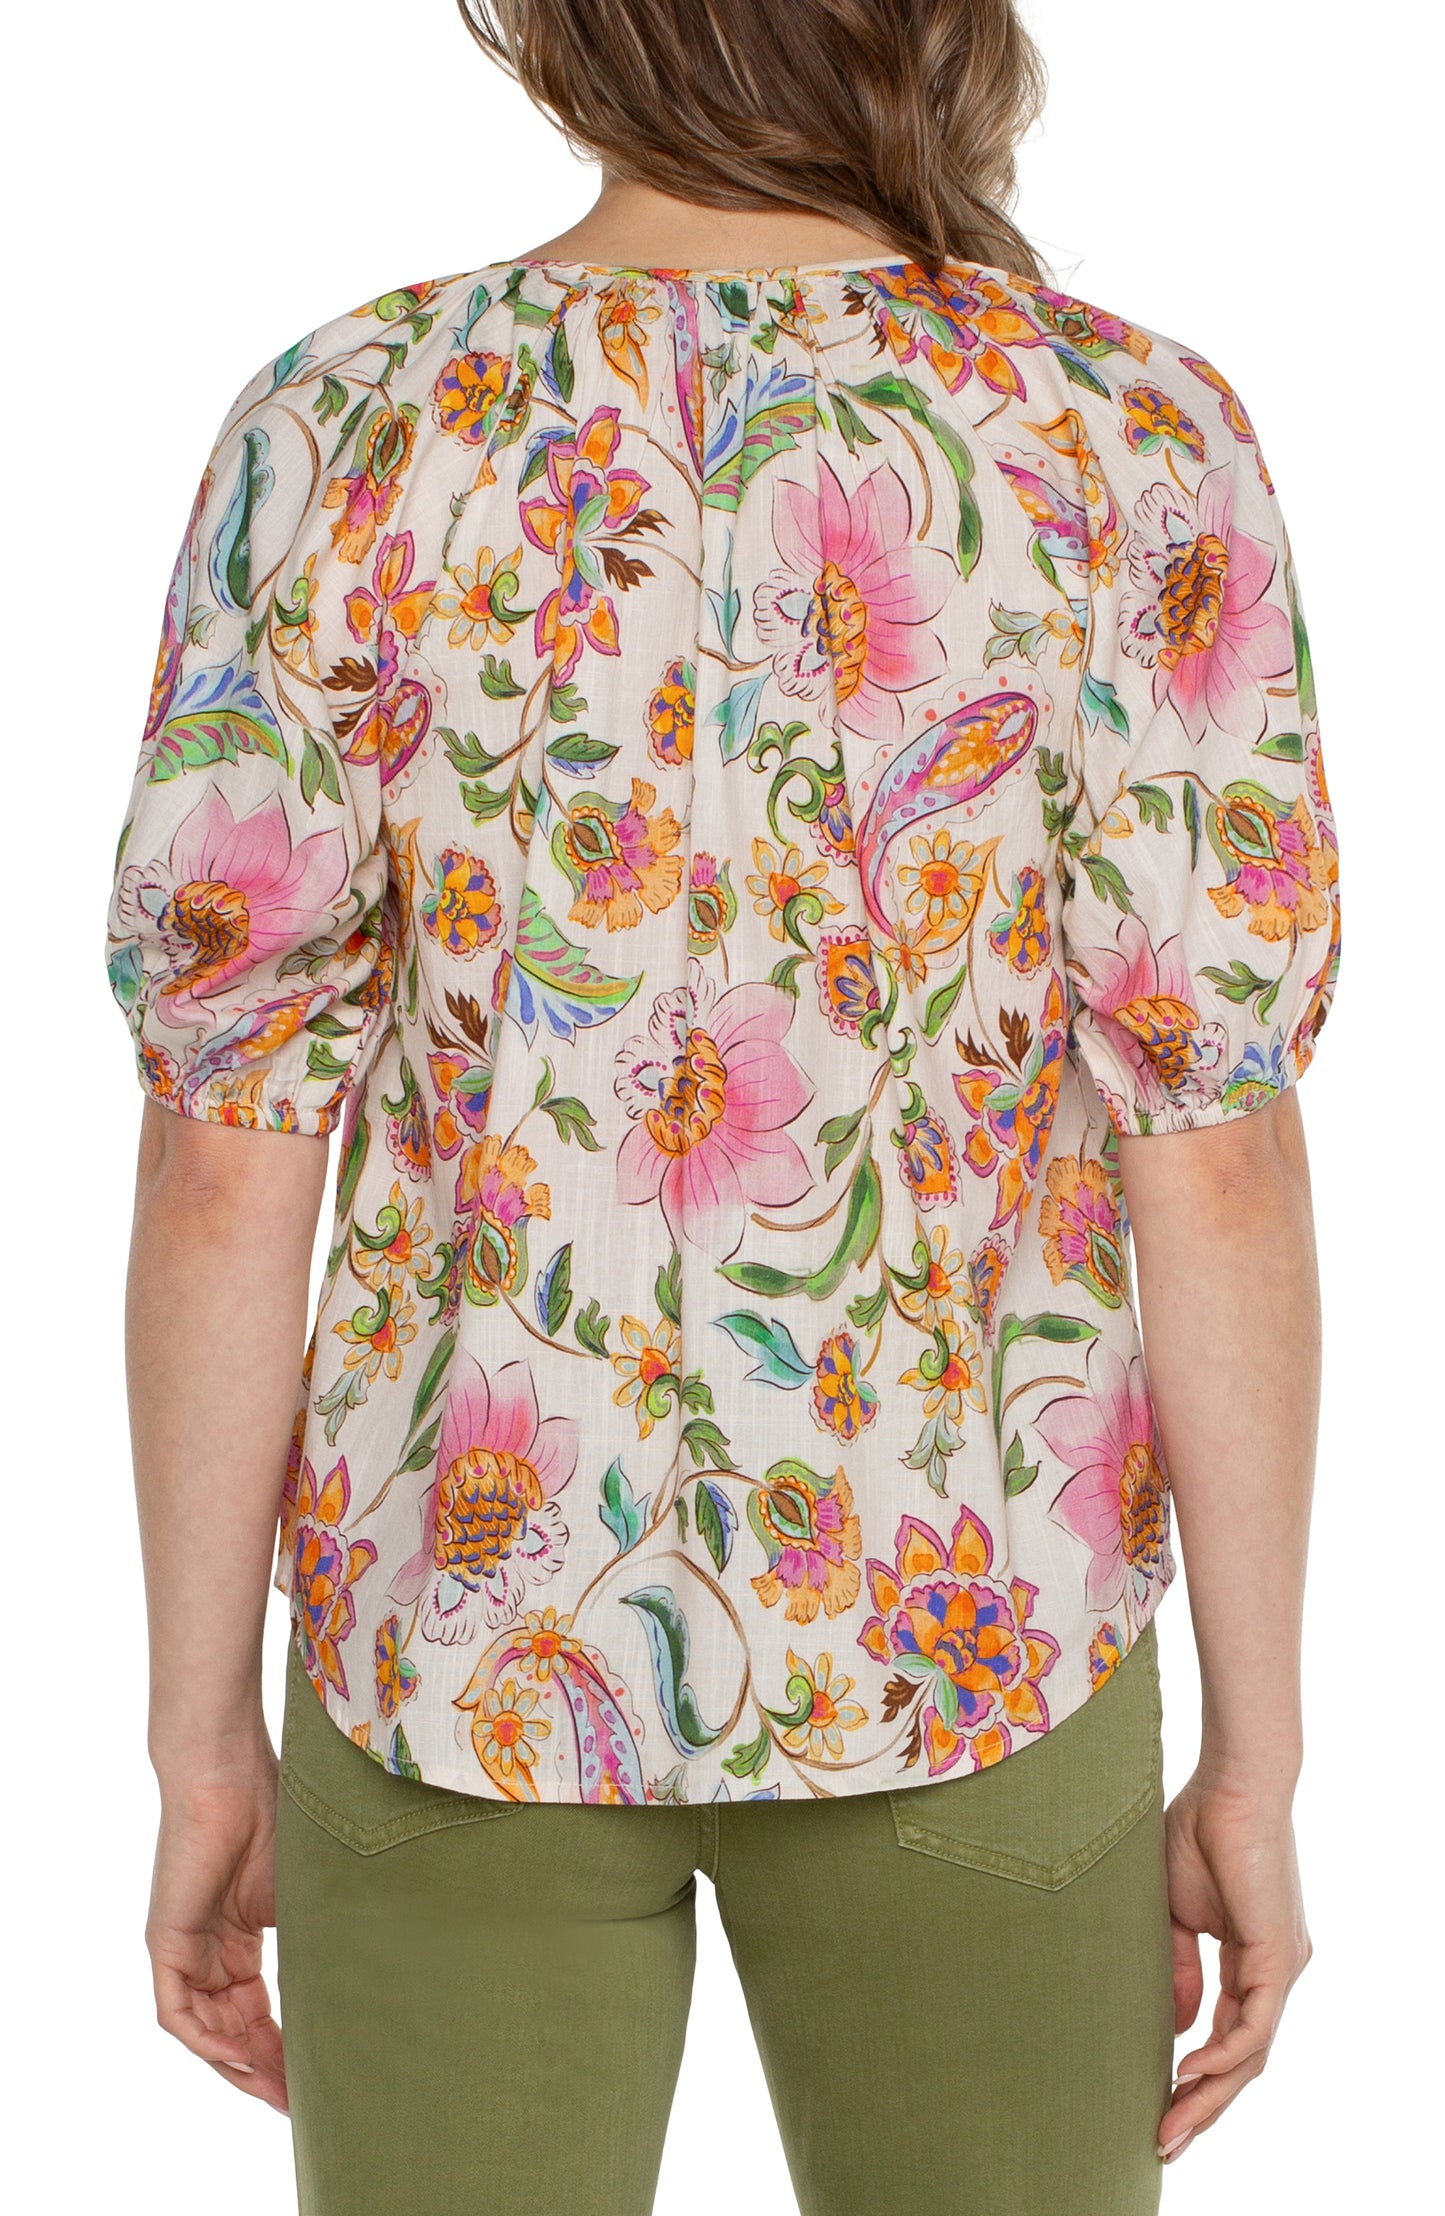 Liverpool - Floral Button Up Top